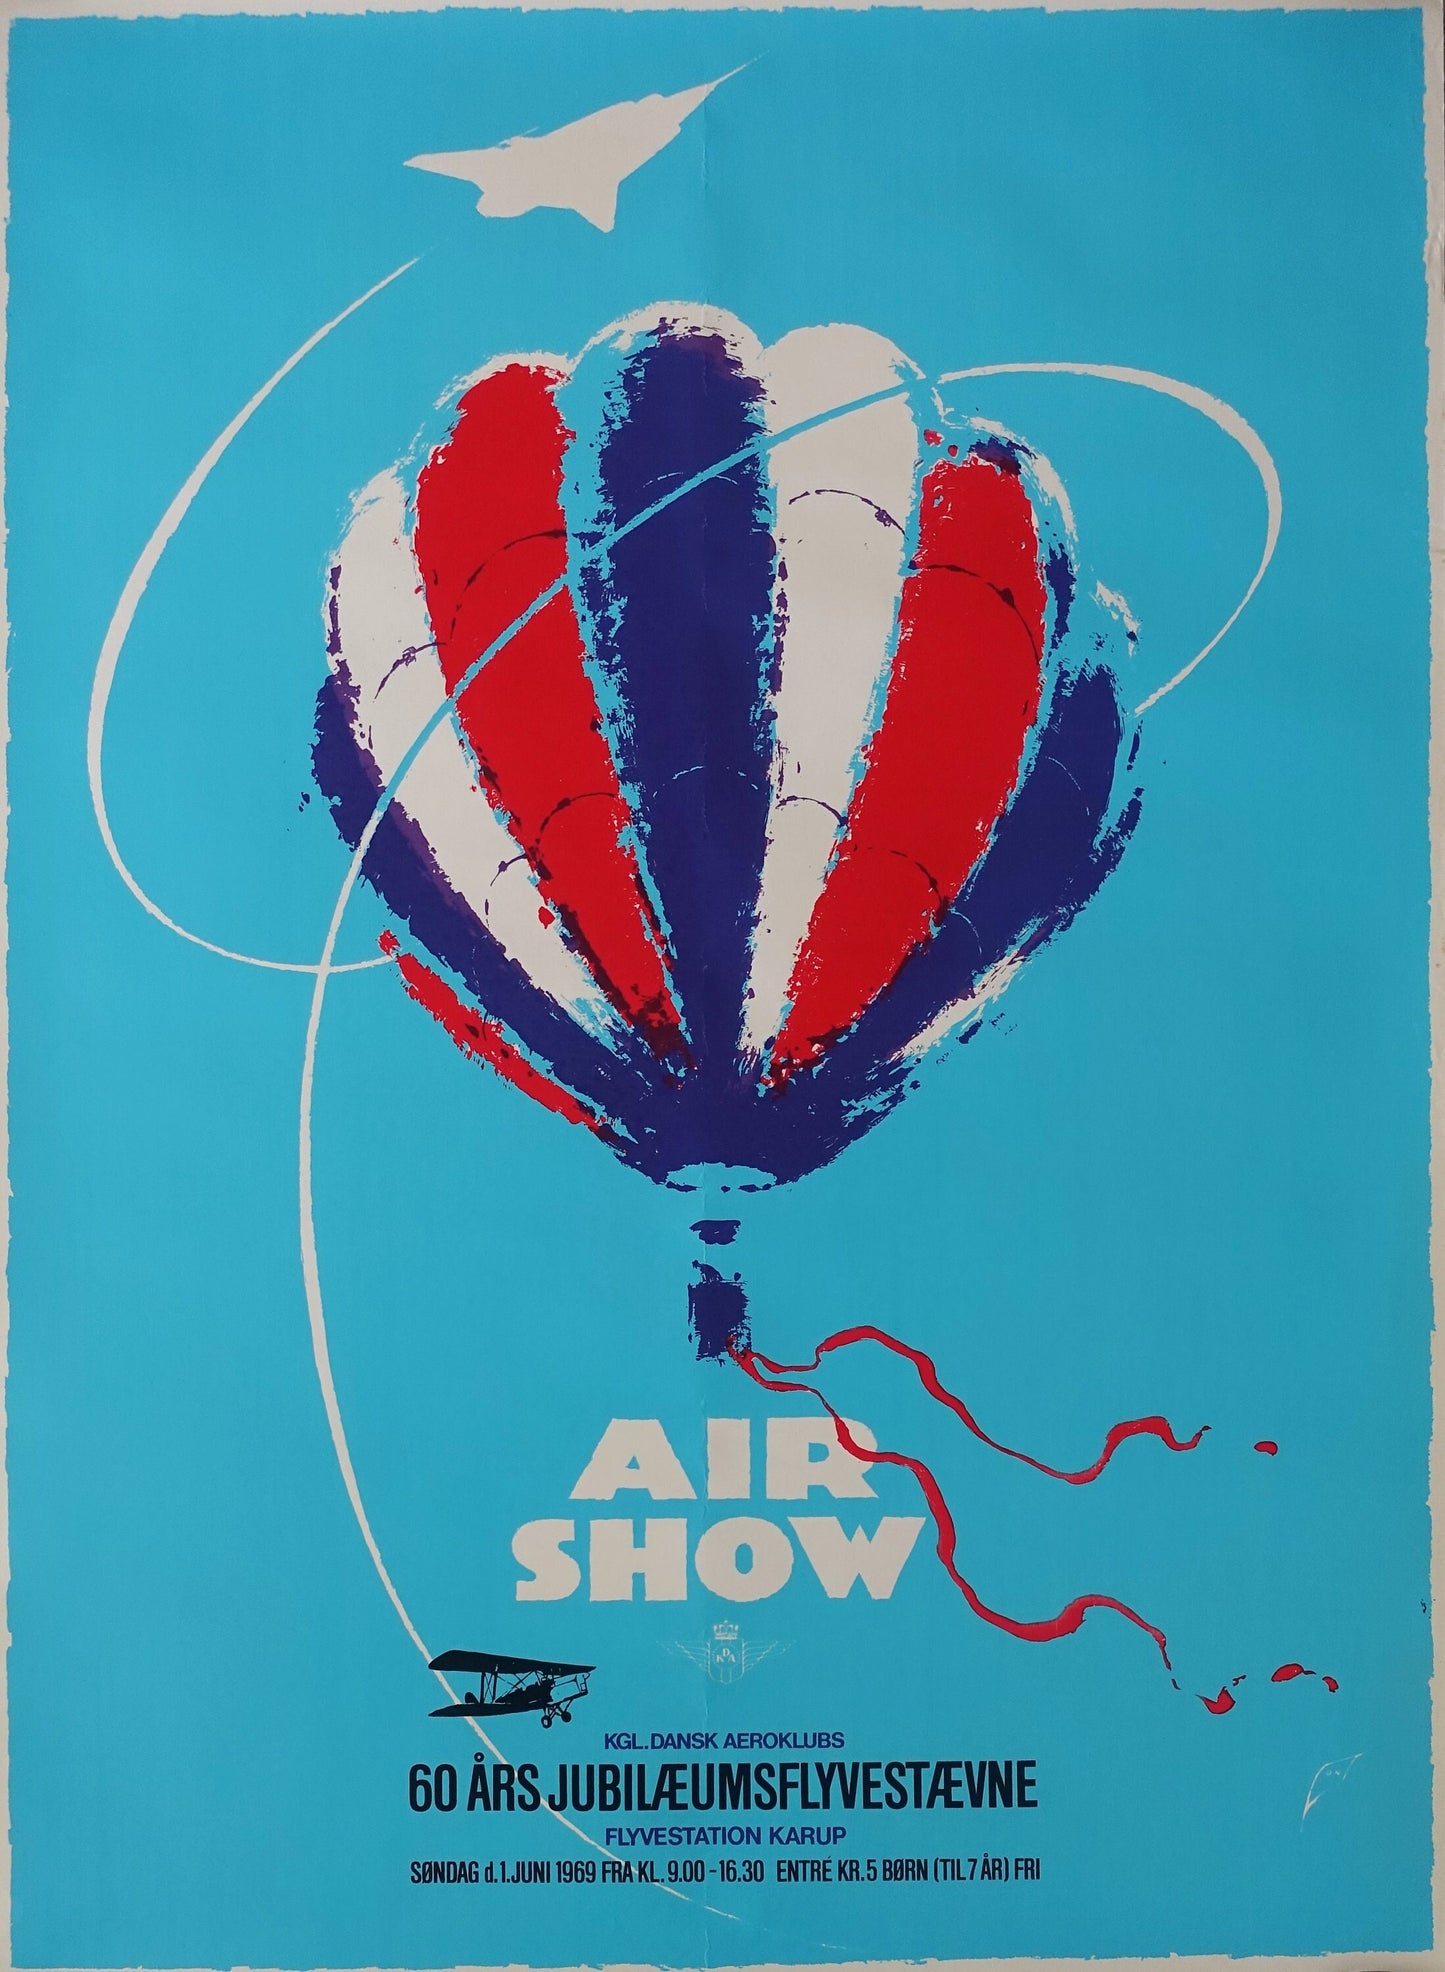 1969 Air Show by Otto Nielsen - Original Vintage Poster